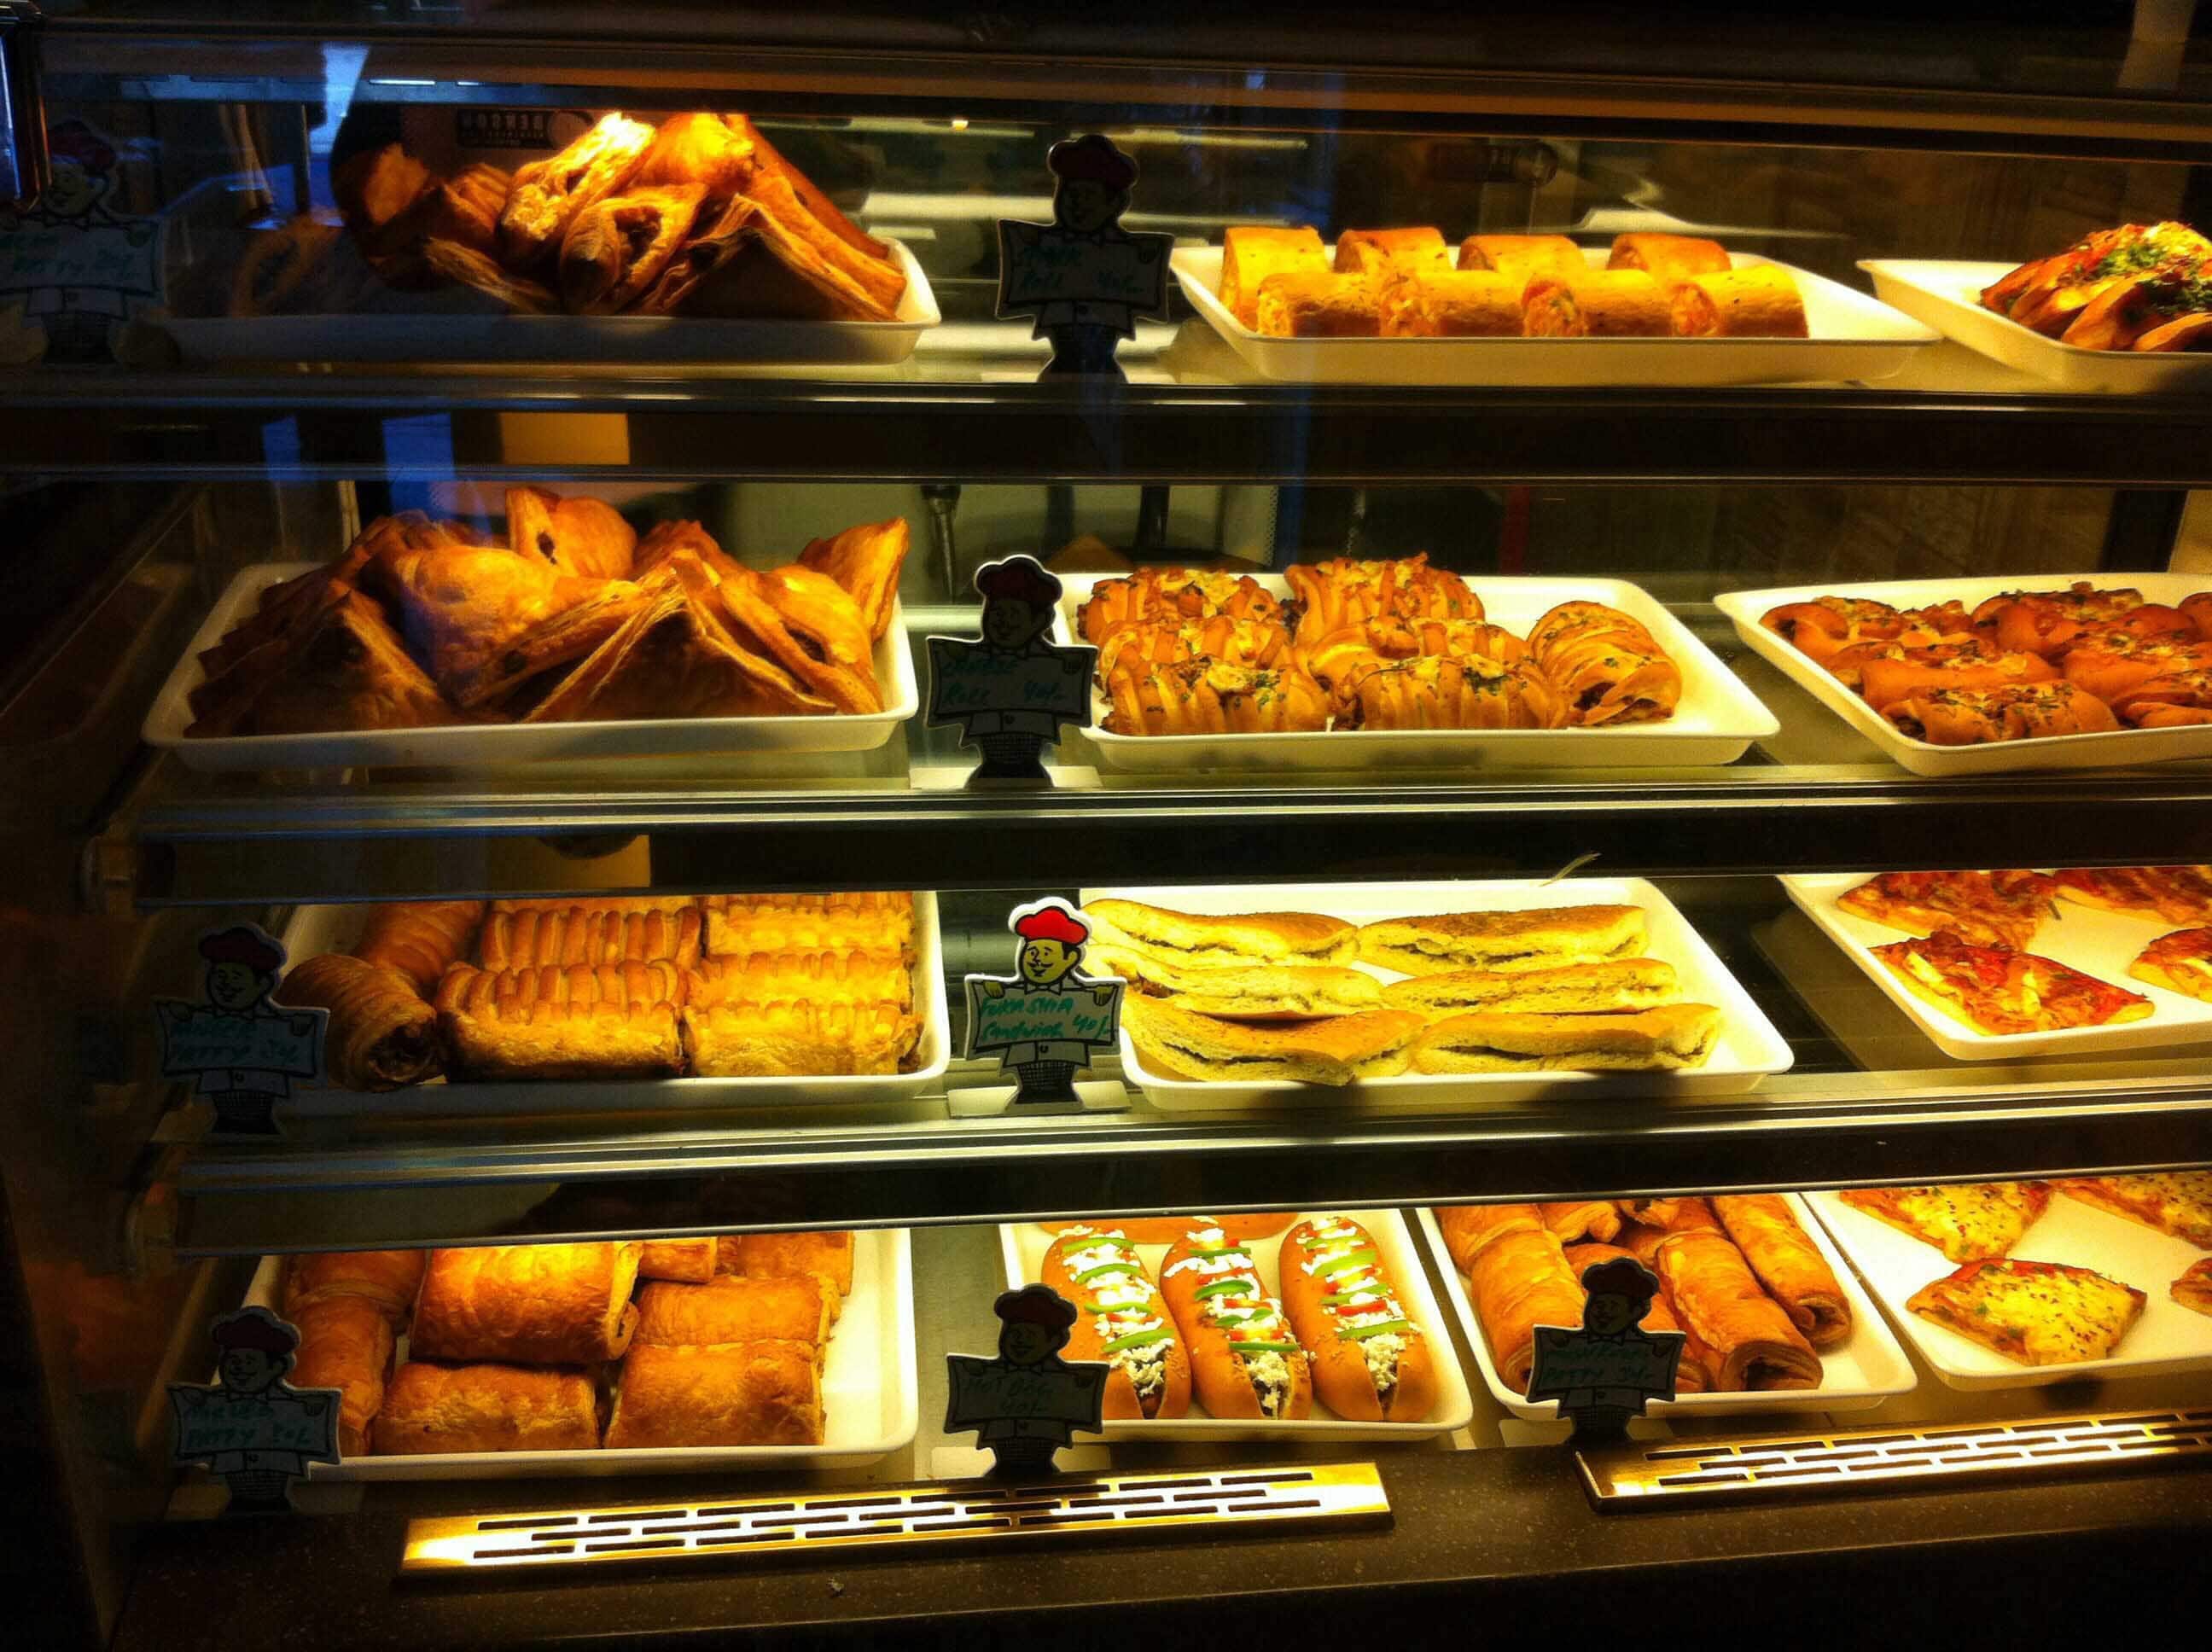 Hot Breads Cake Shop, Bakery & Restaurant - Bakery in Ludhiana, India |  Top-Rated.Online